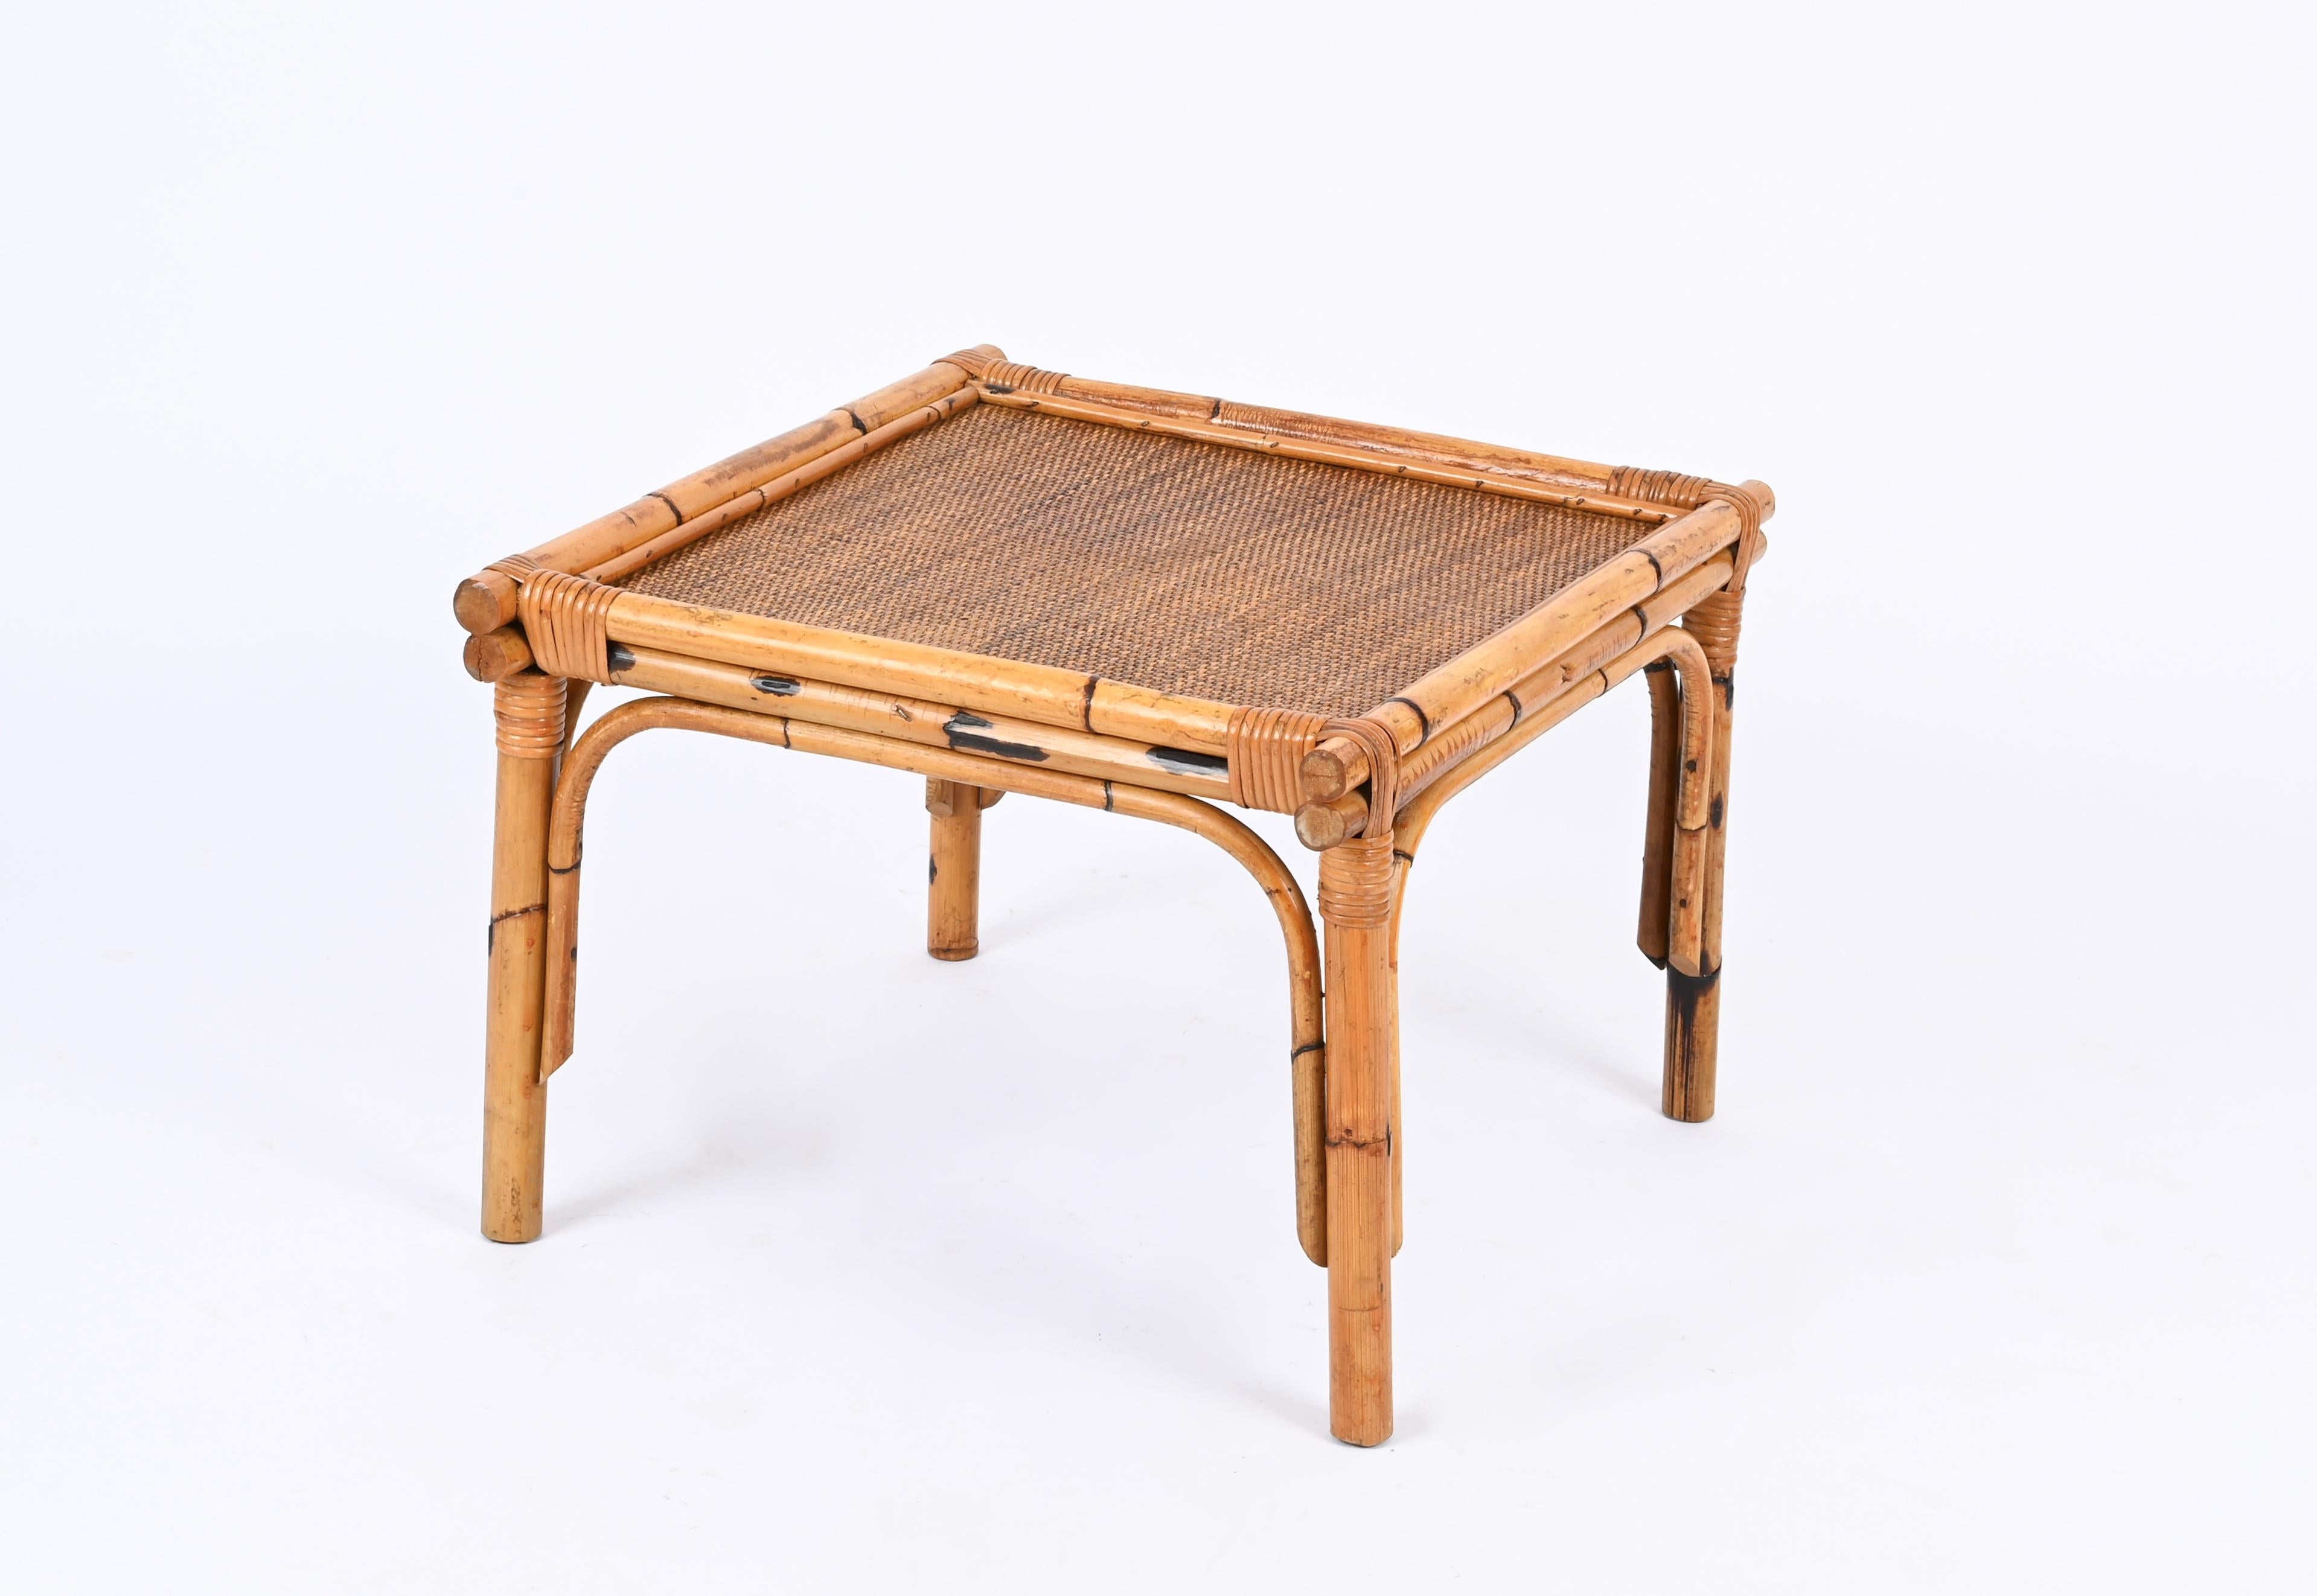 Pair of French Riviera Square Coffee Table in Rattan and Wicker, Italy 1970s For Sale 6